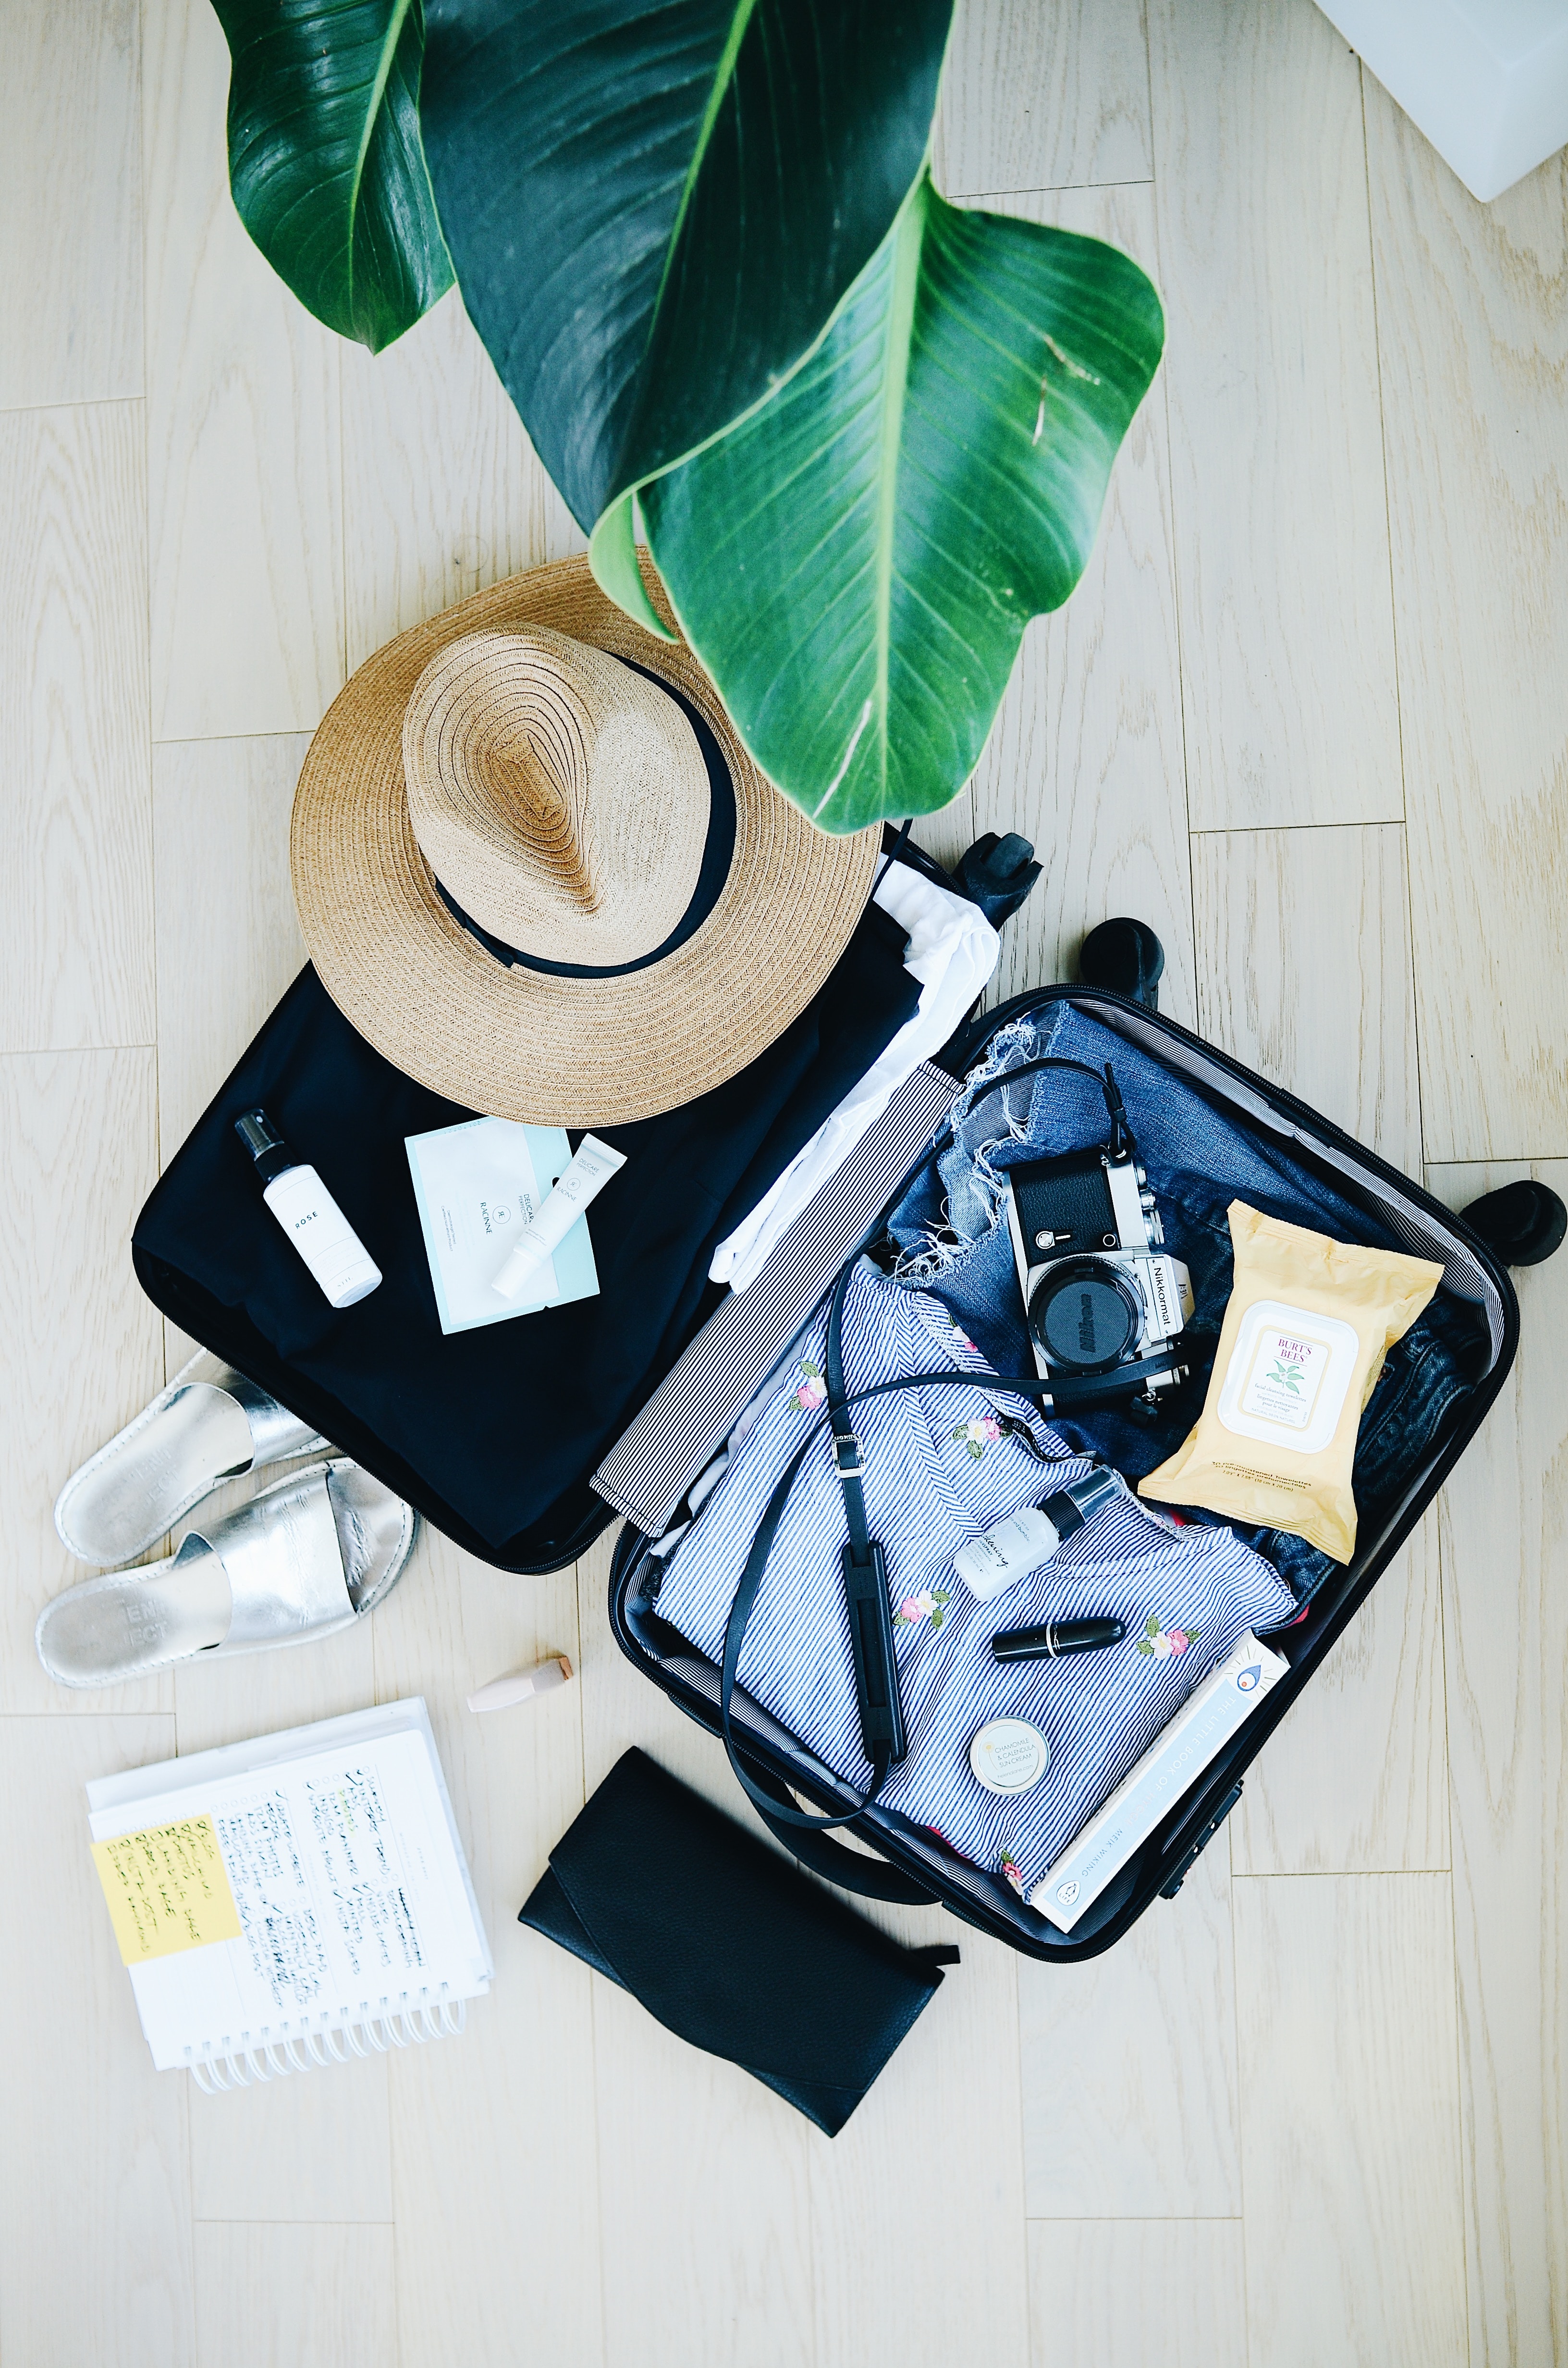 Open suitcase, neatly packed with a camera, sandles and hat near to a palm leaf. All ready for vacation.